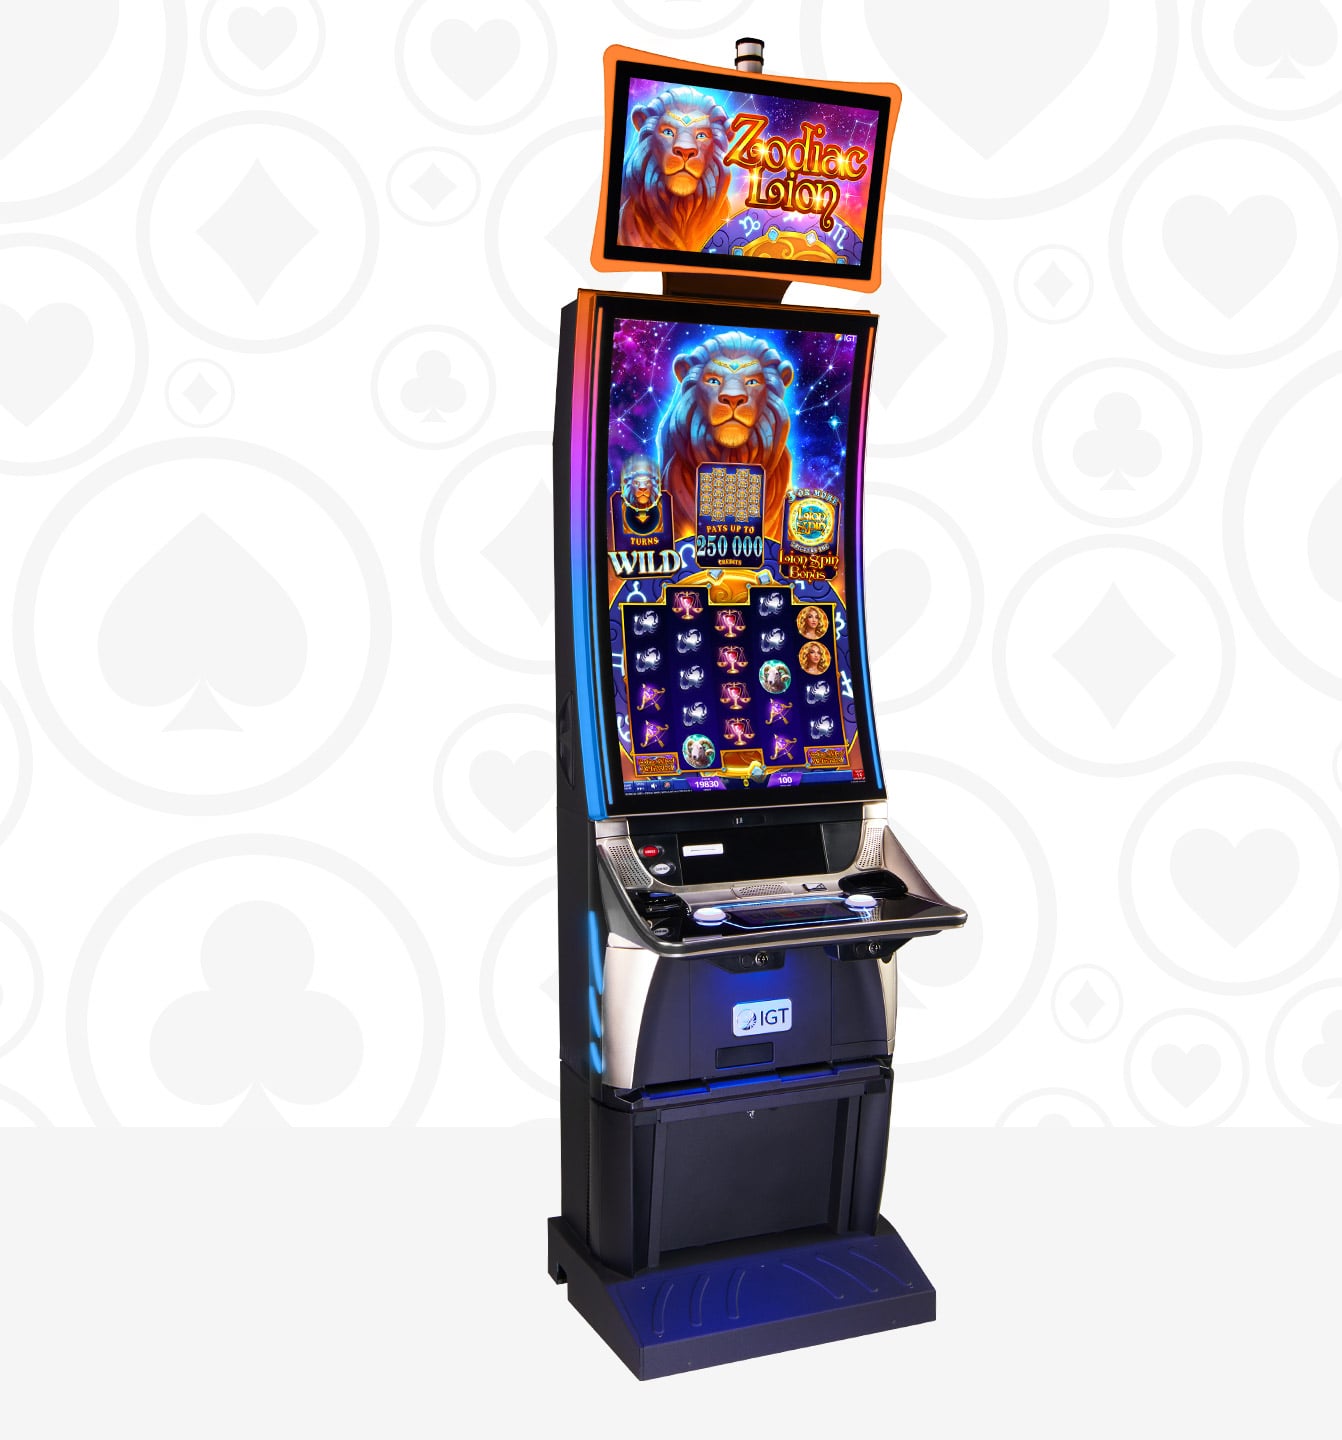 diamond cash: oasis riches slot machines online drawing